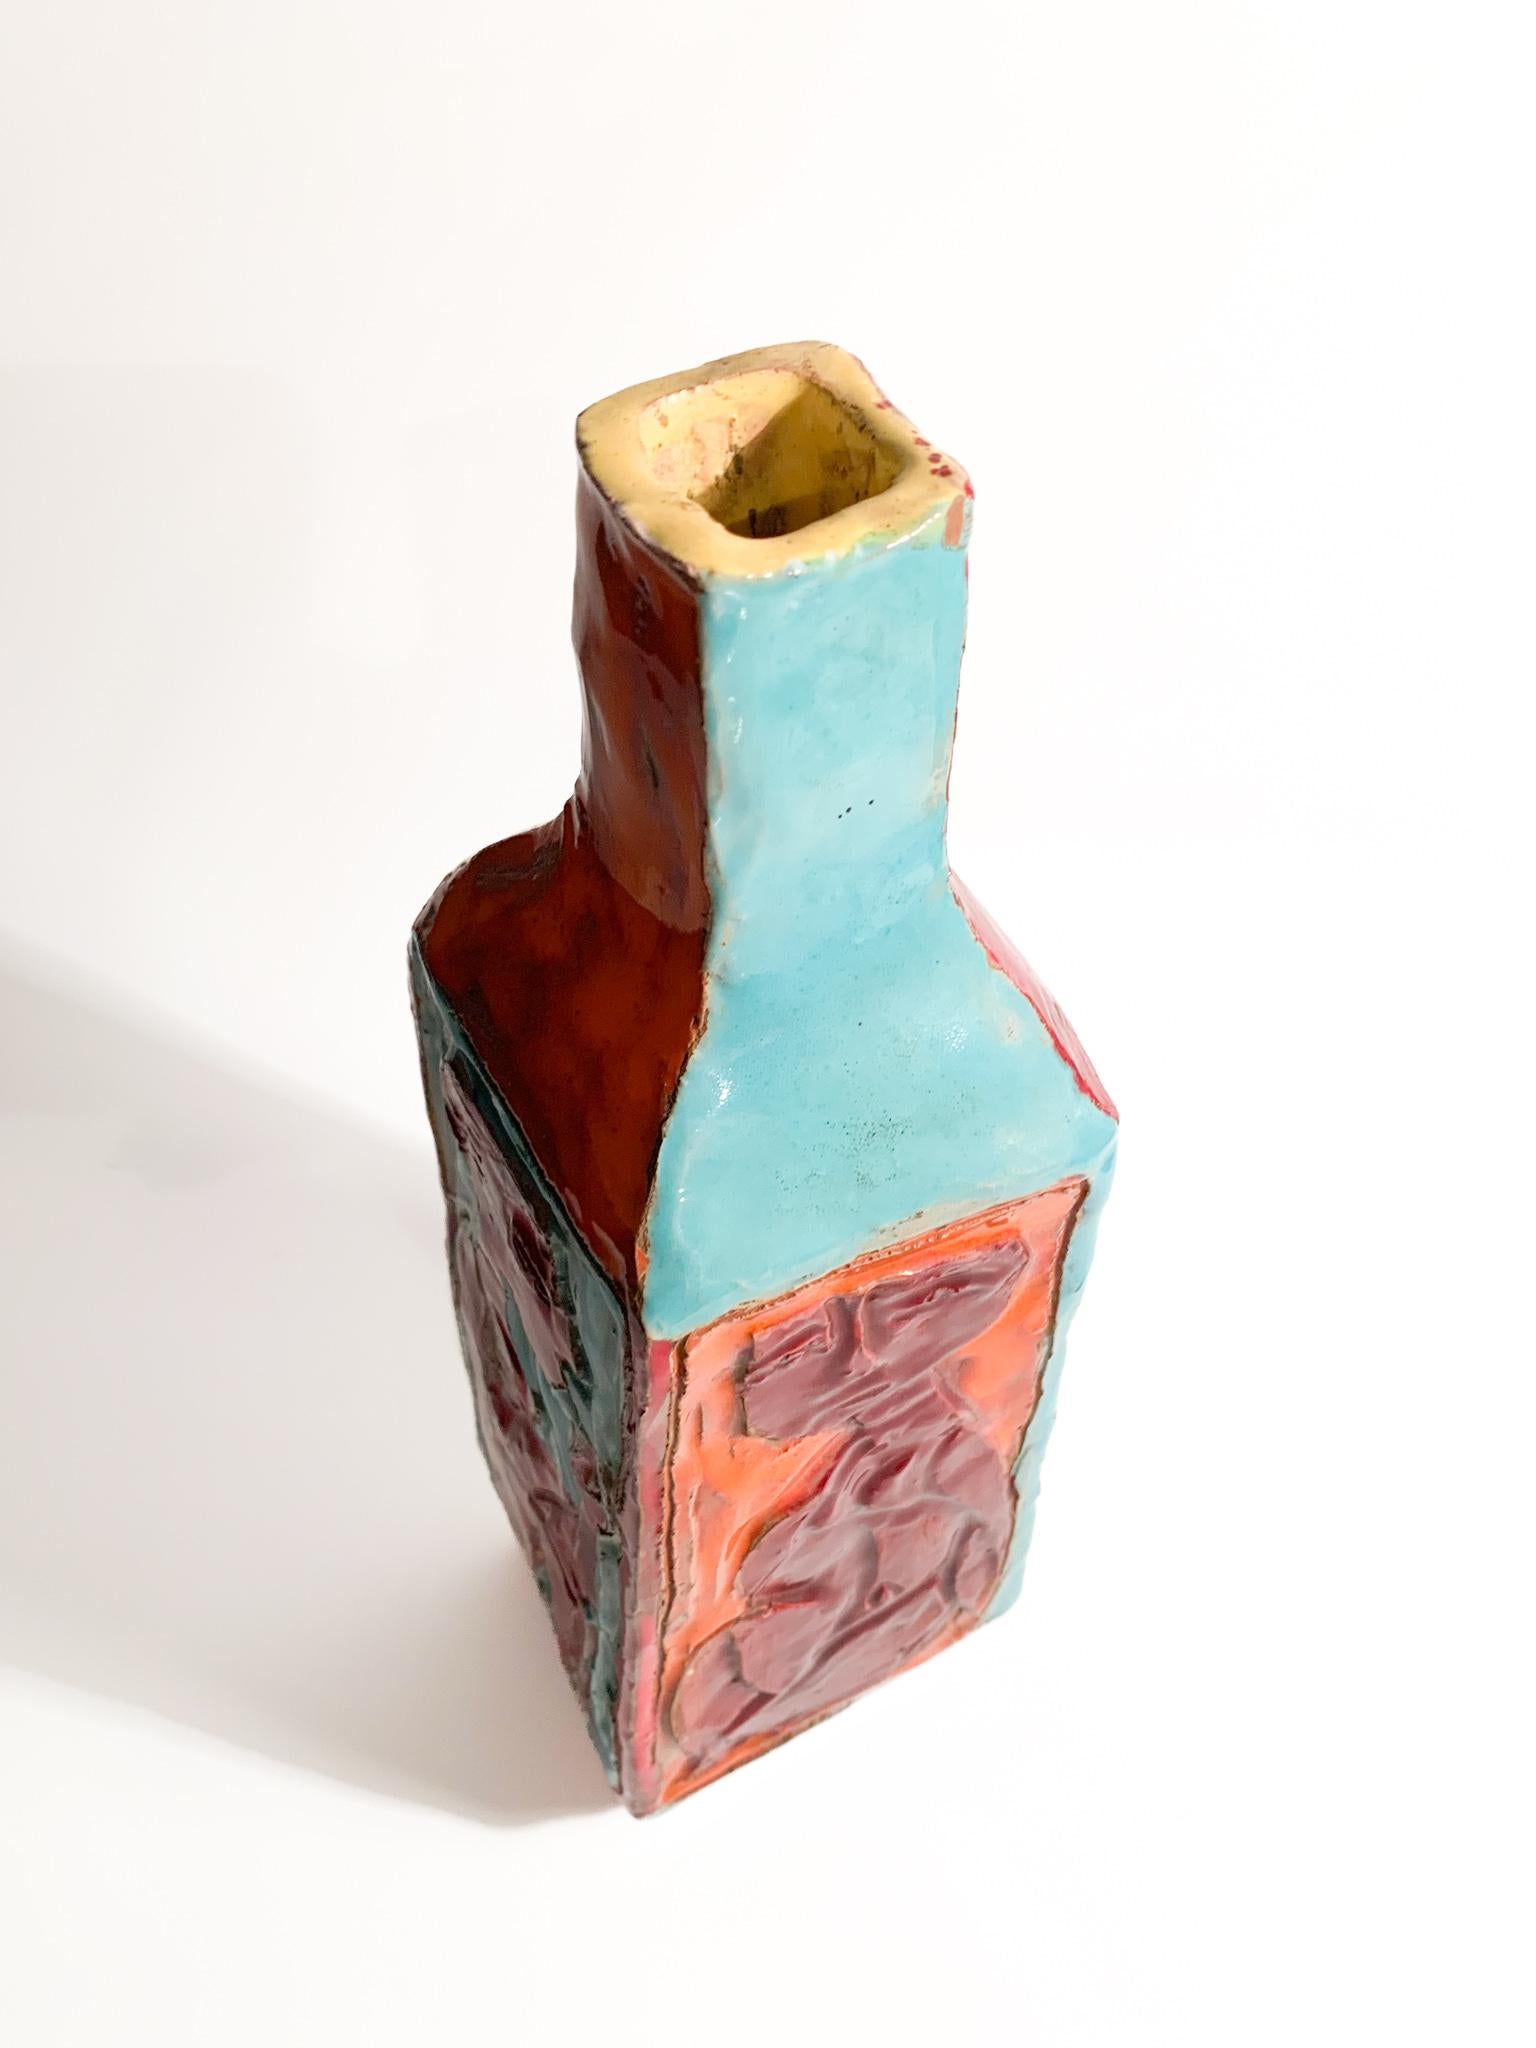 Multicolored Ceramic Vase Attributed to the Cantagalli Manufacture in the 1950s For Sale 4